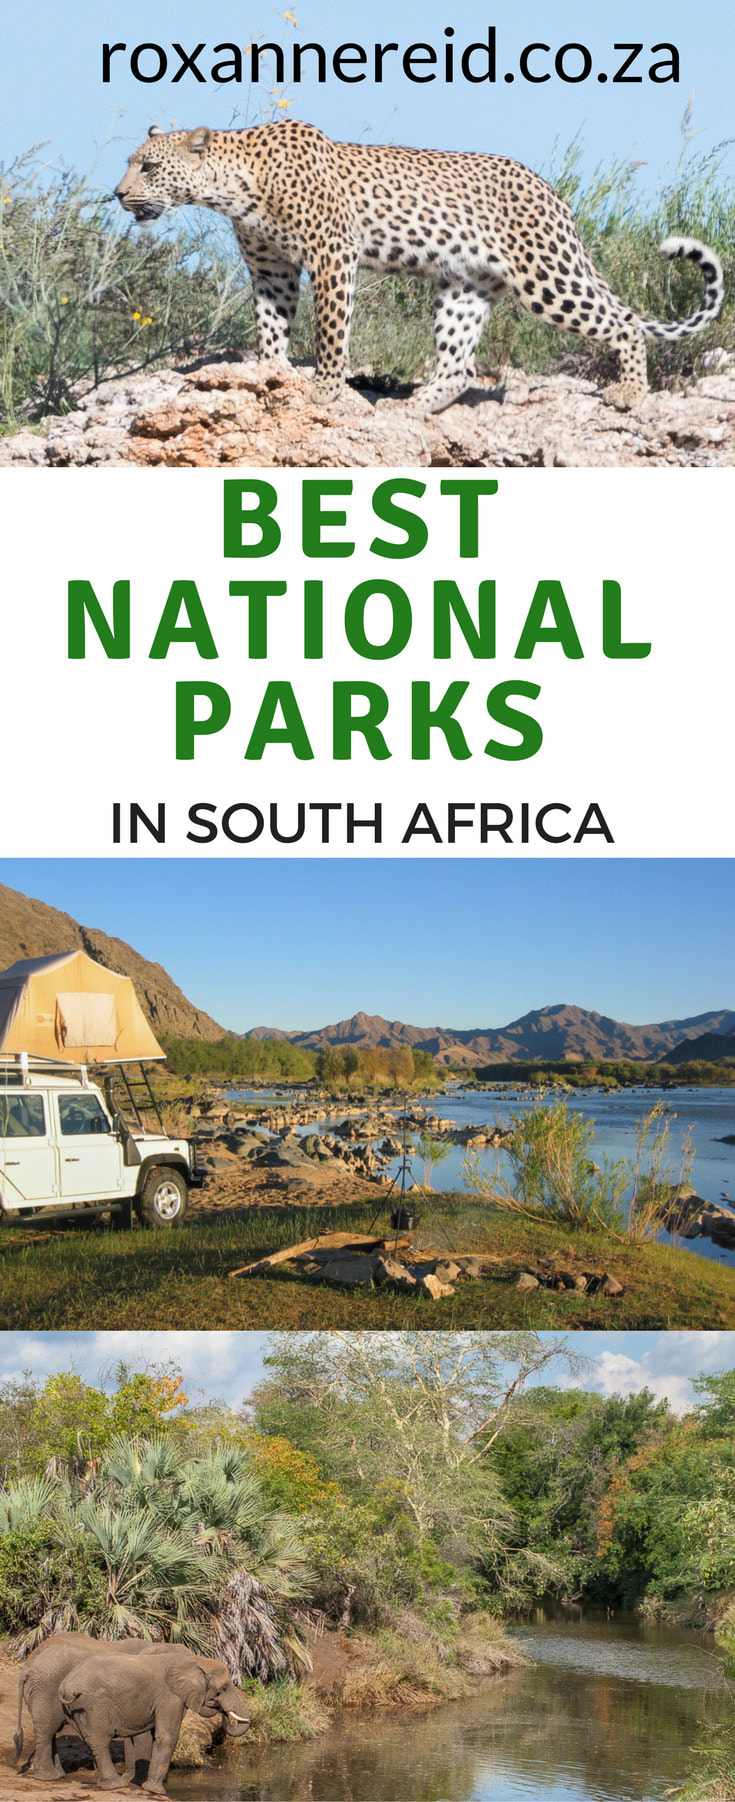 5 of the best national parks in SouthAfrica and why you should visit  #nationalparks #travel #safari #wildlife